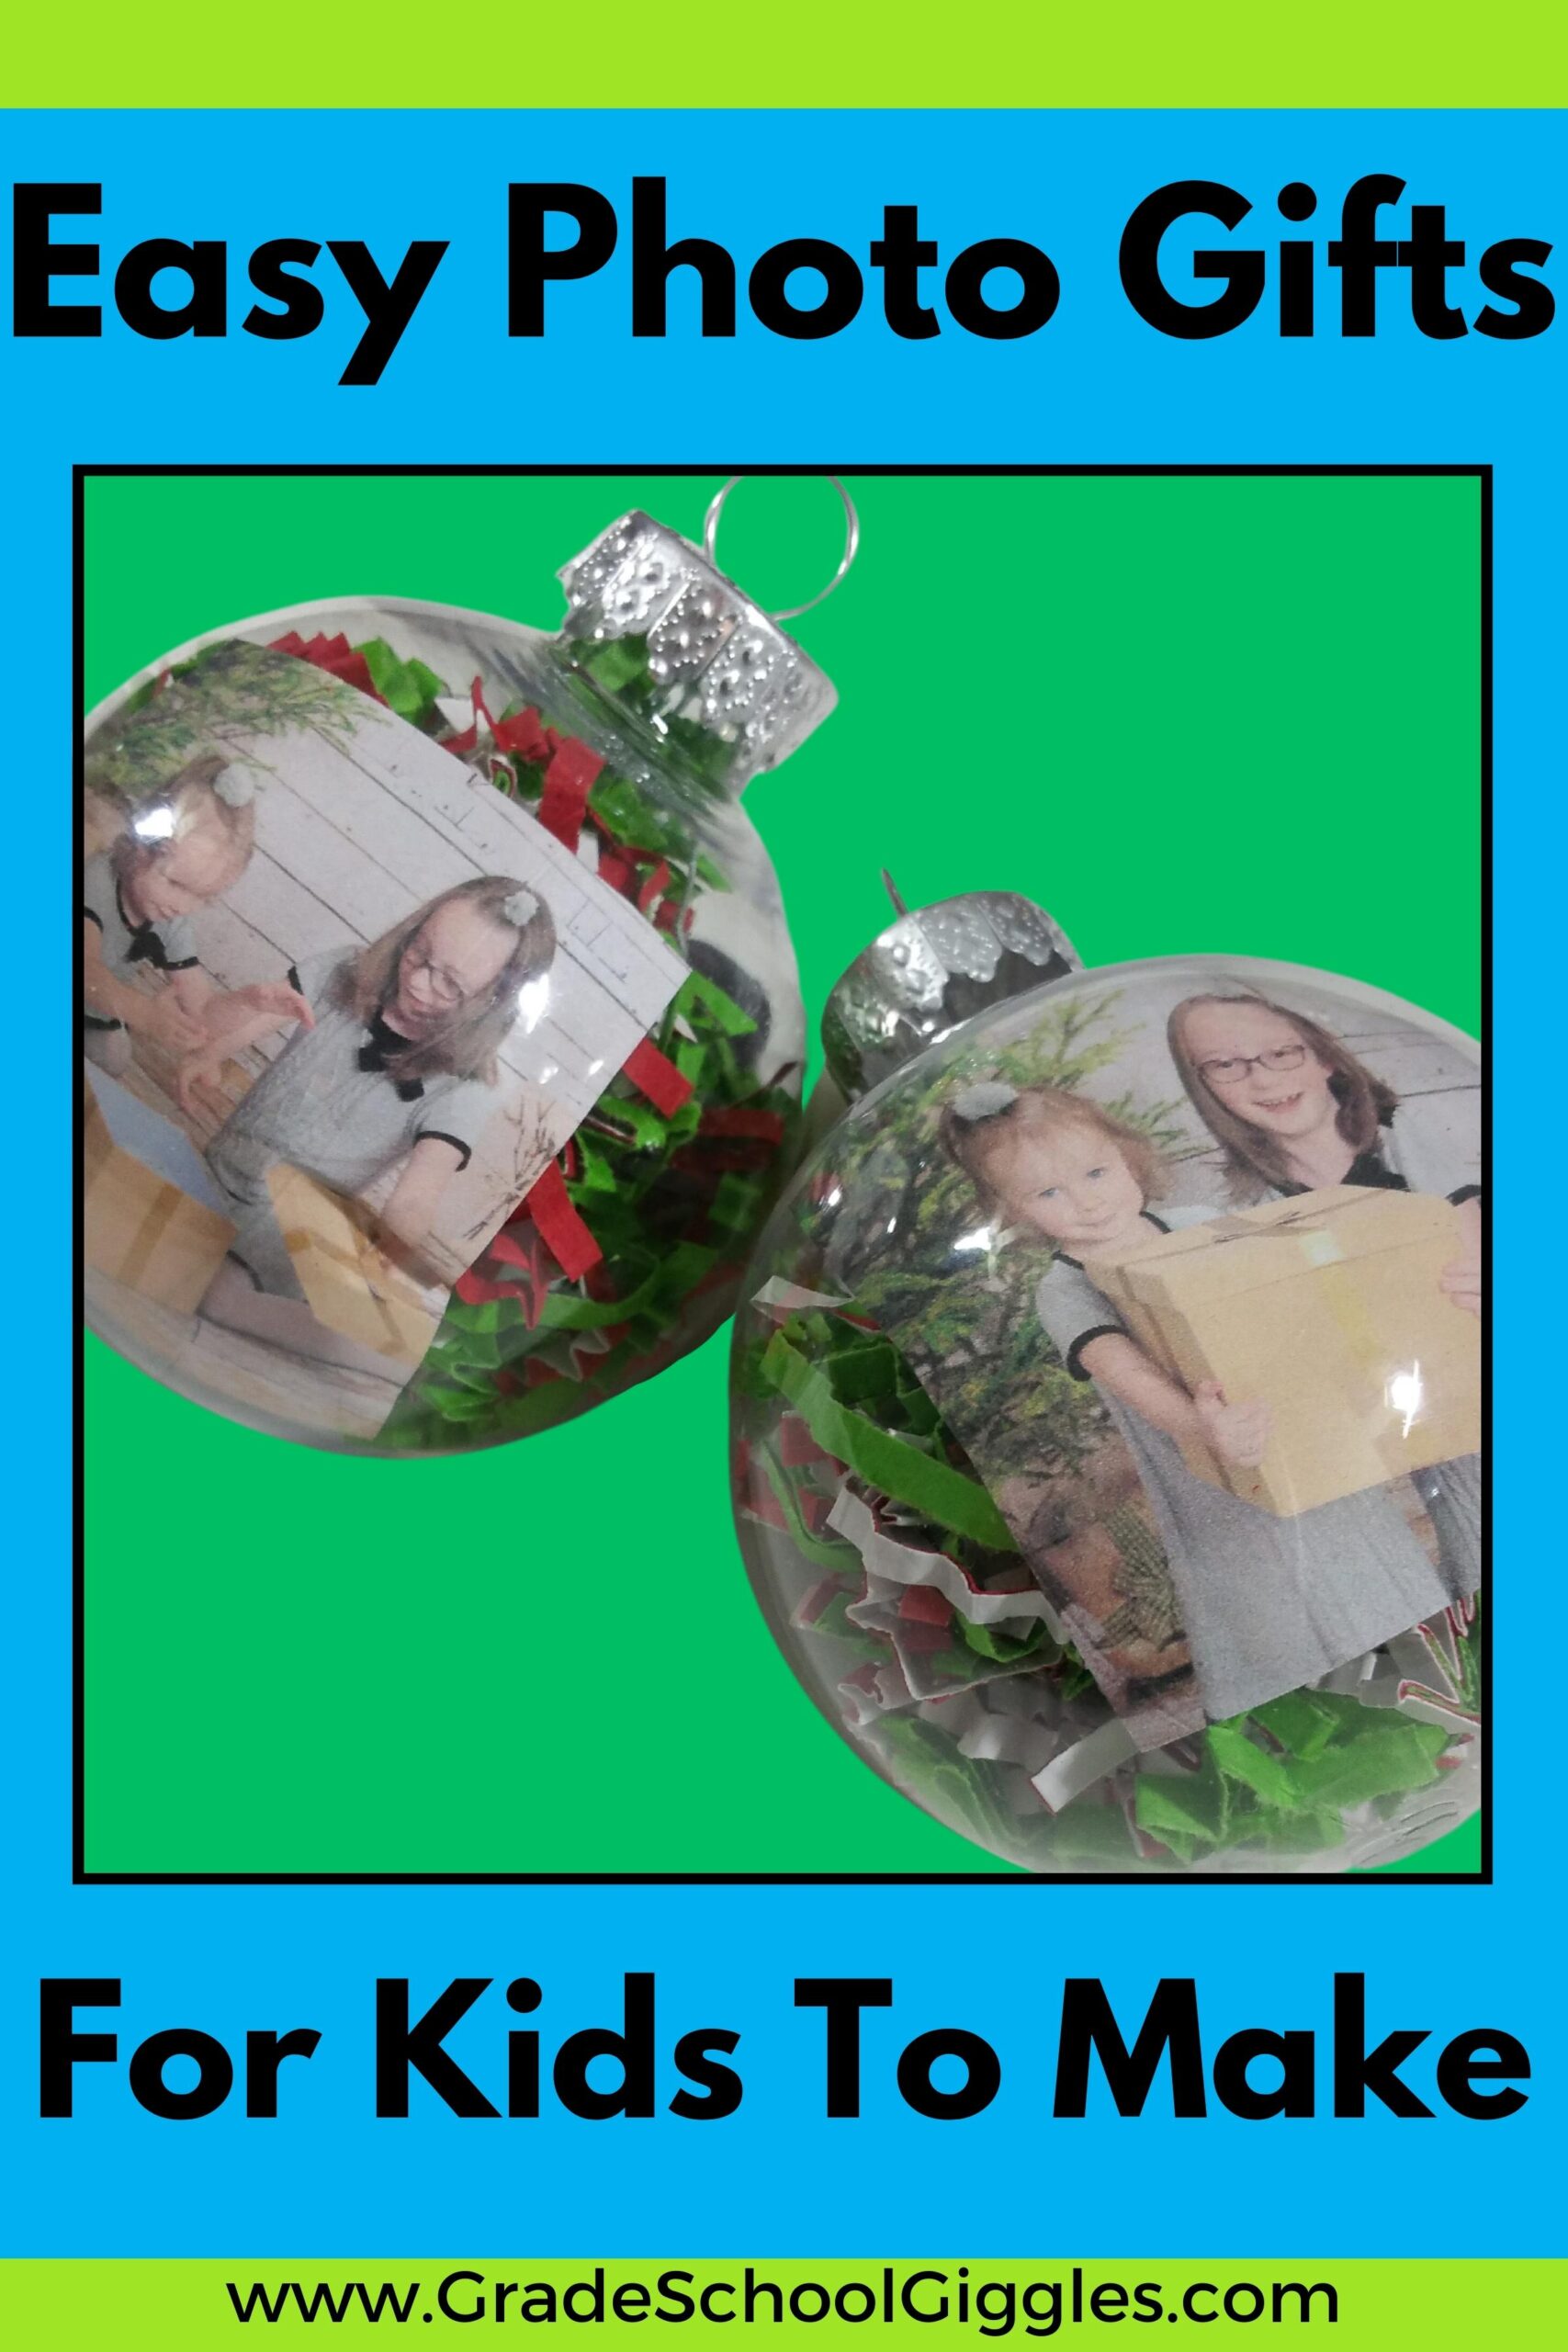 Photo Gifts for Kids, Create Kids Gifts